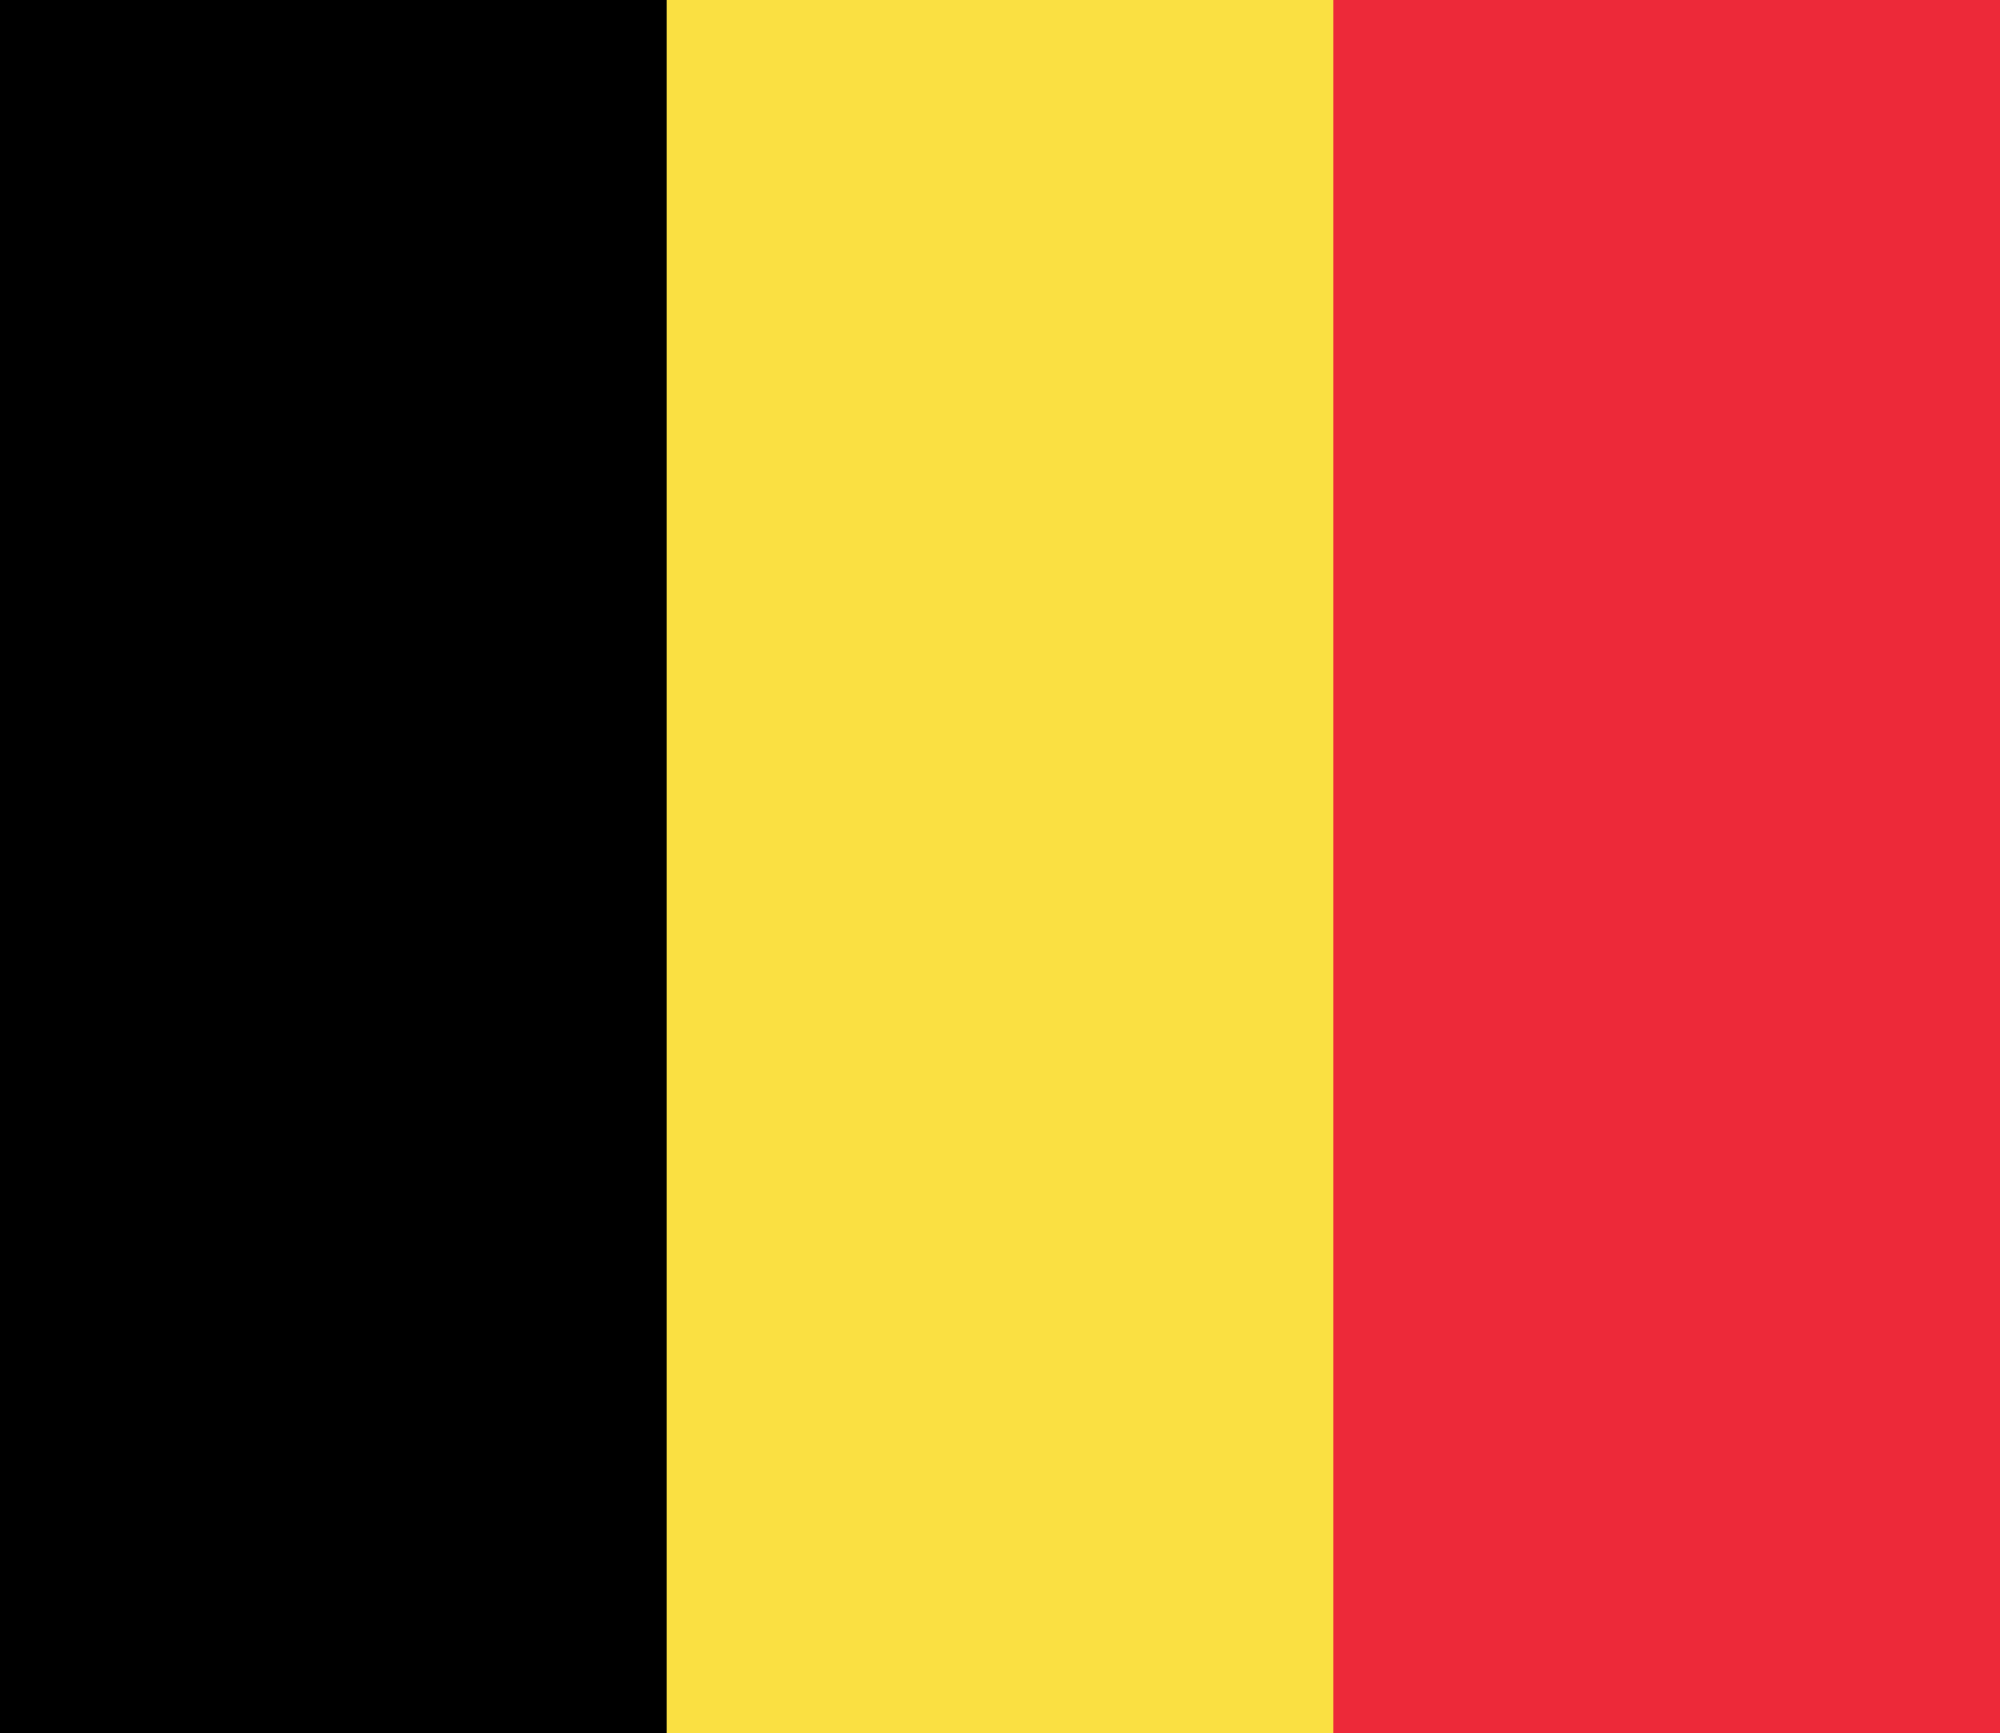 Black N Red and Yellow Logo - Flag of Belgium